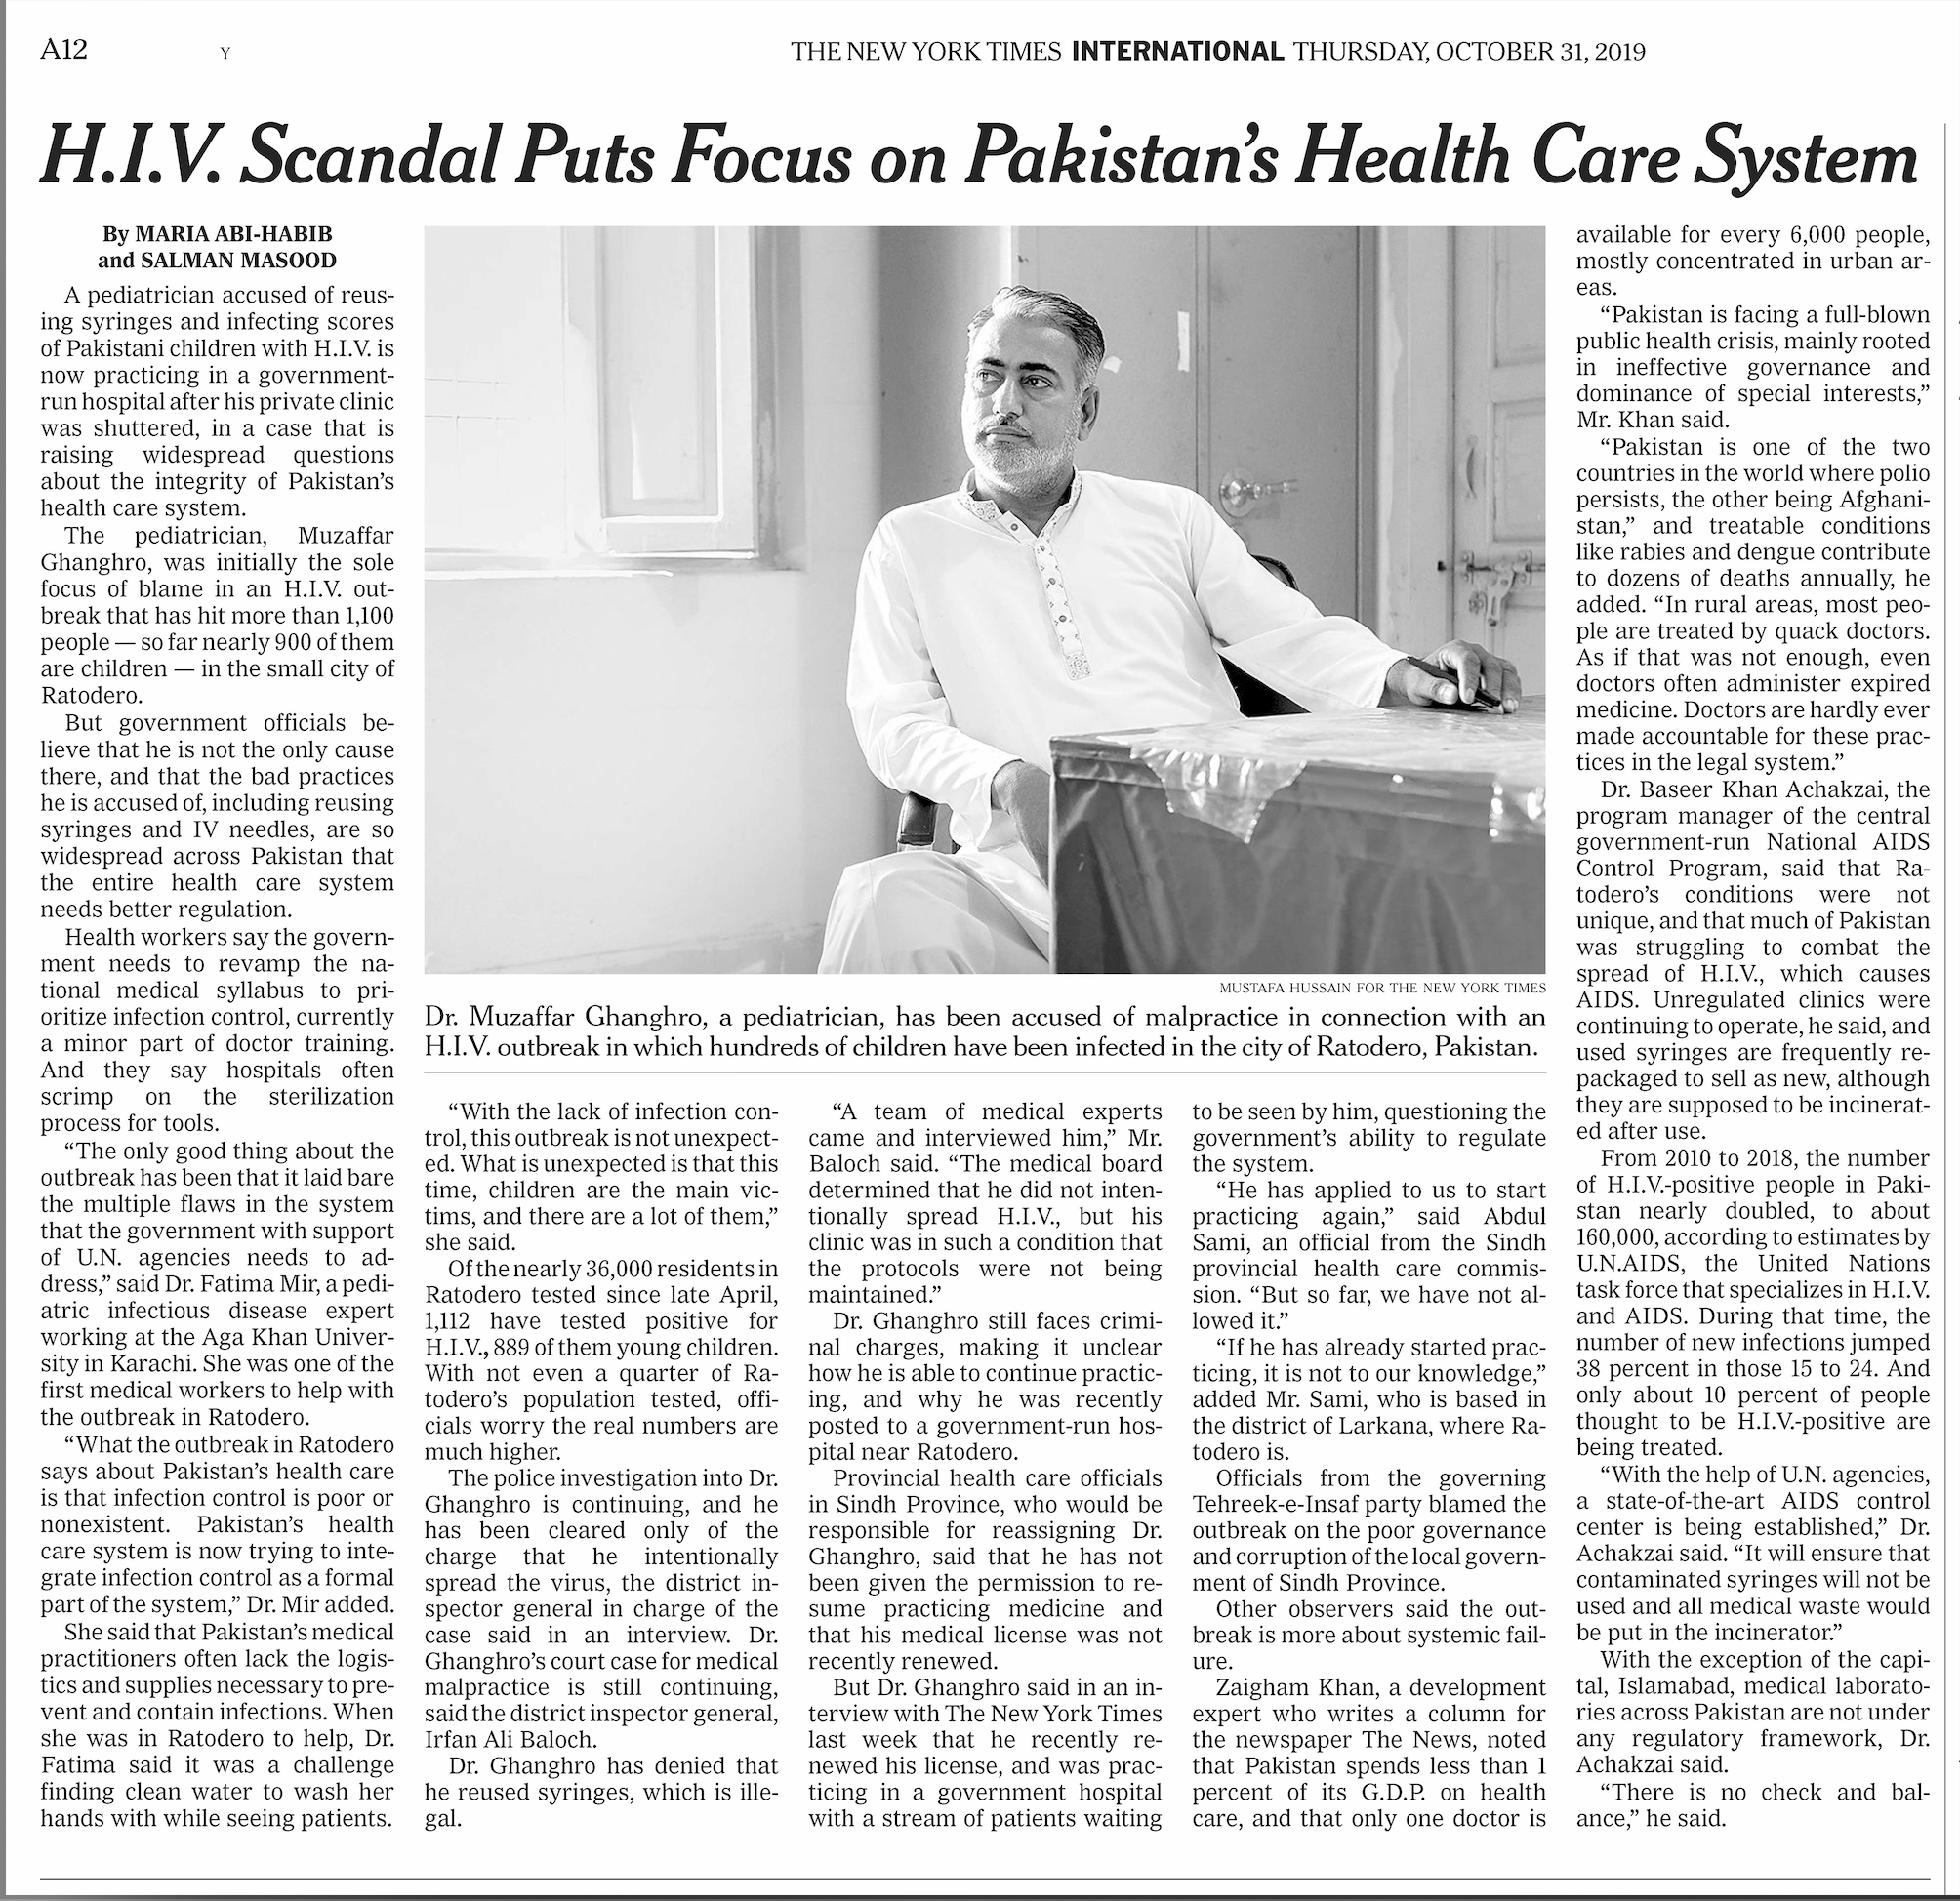   https://www.nytimes.com/2019/10/30/world/asia/pakistan-hiv-aids-children.html?action=click&amp;module=RelatedLinks&amp;pgtype=Article  